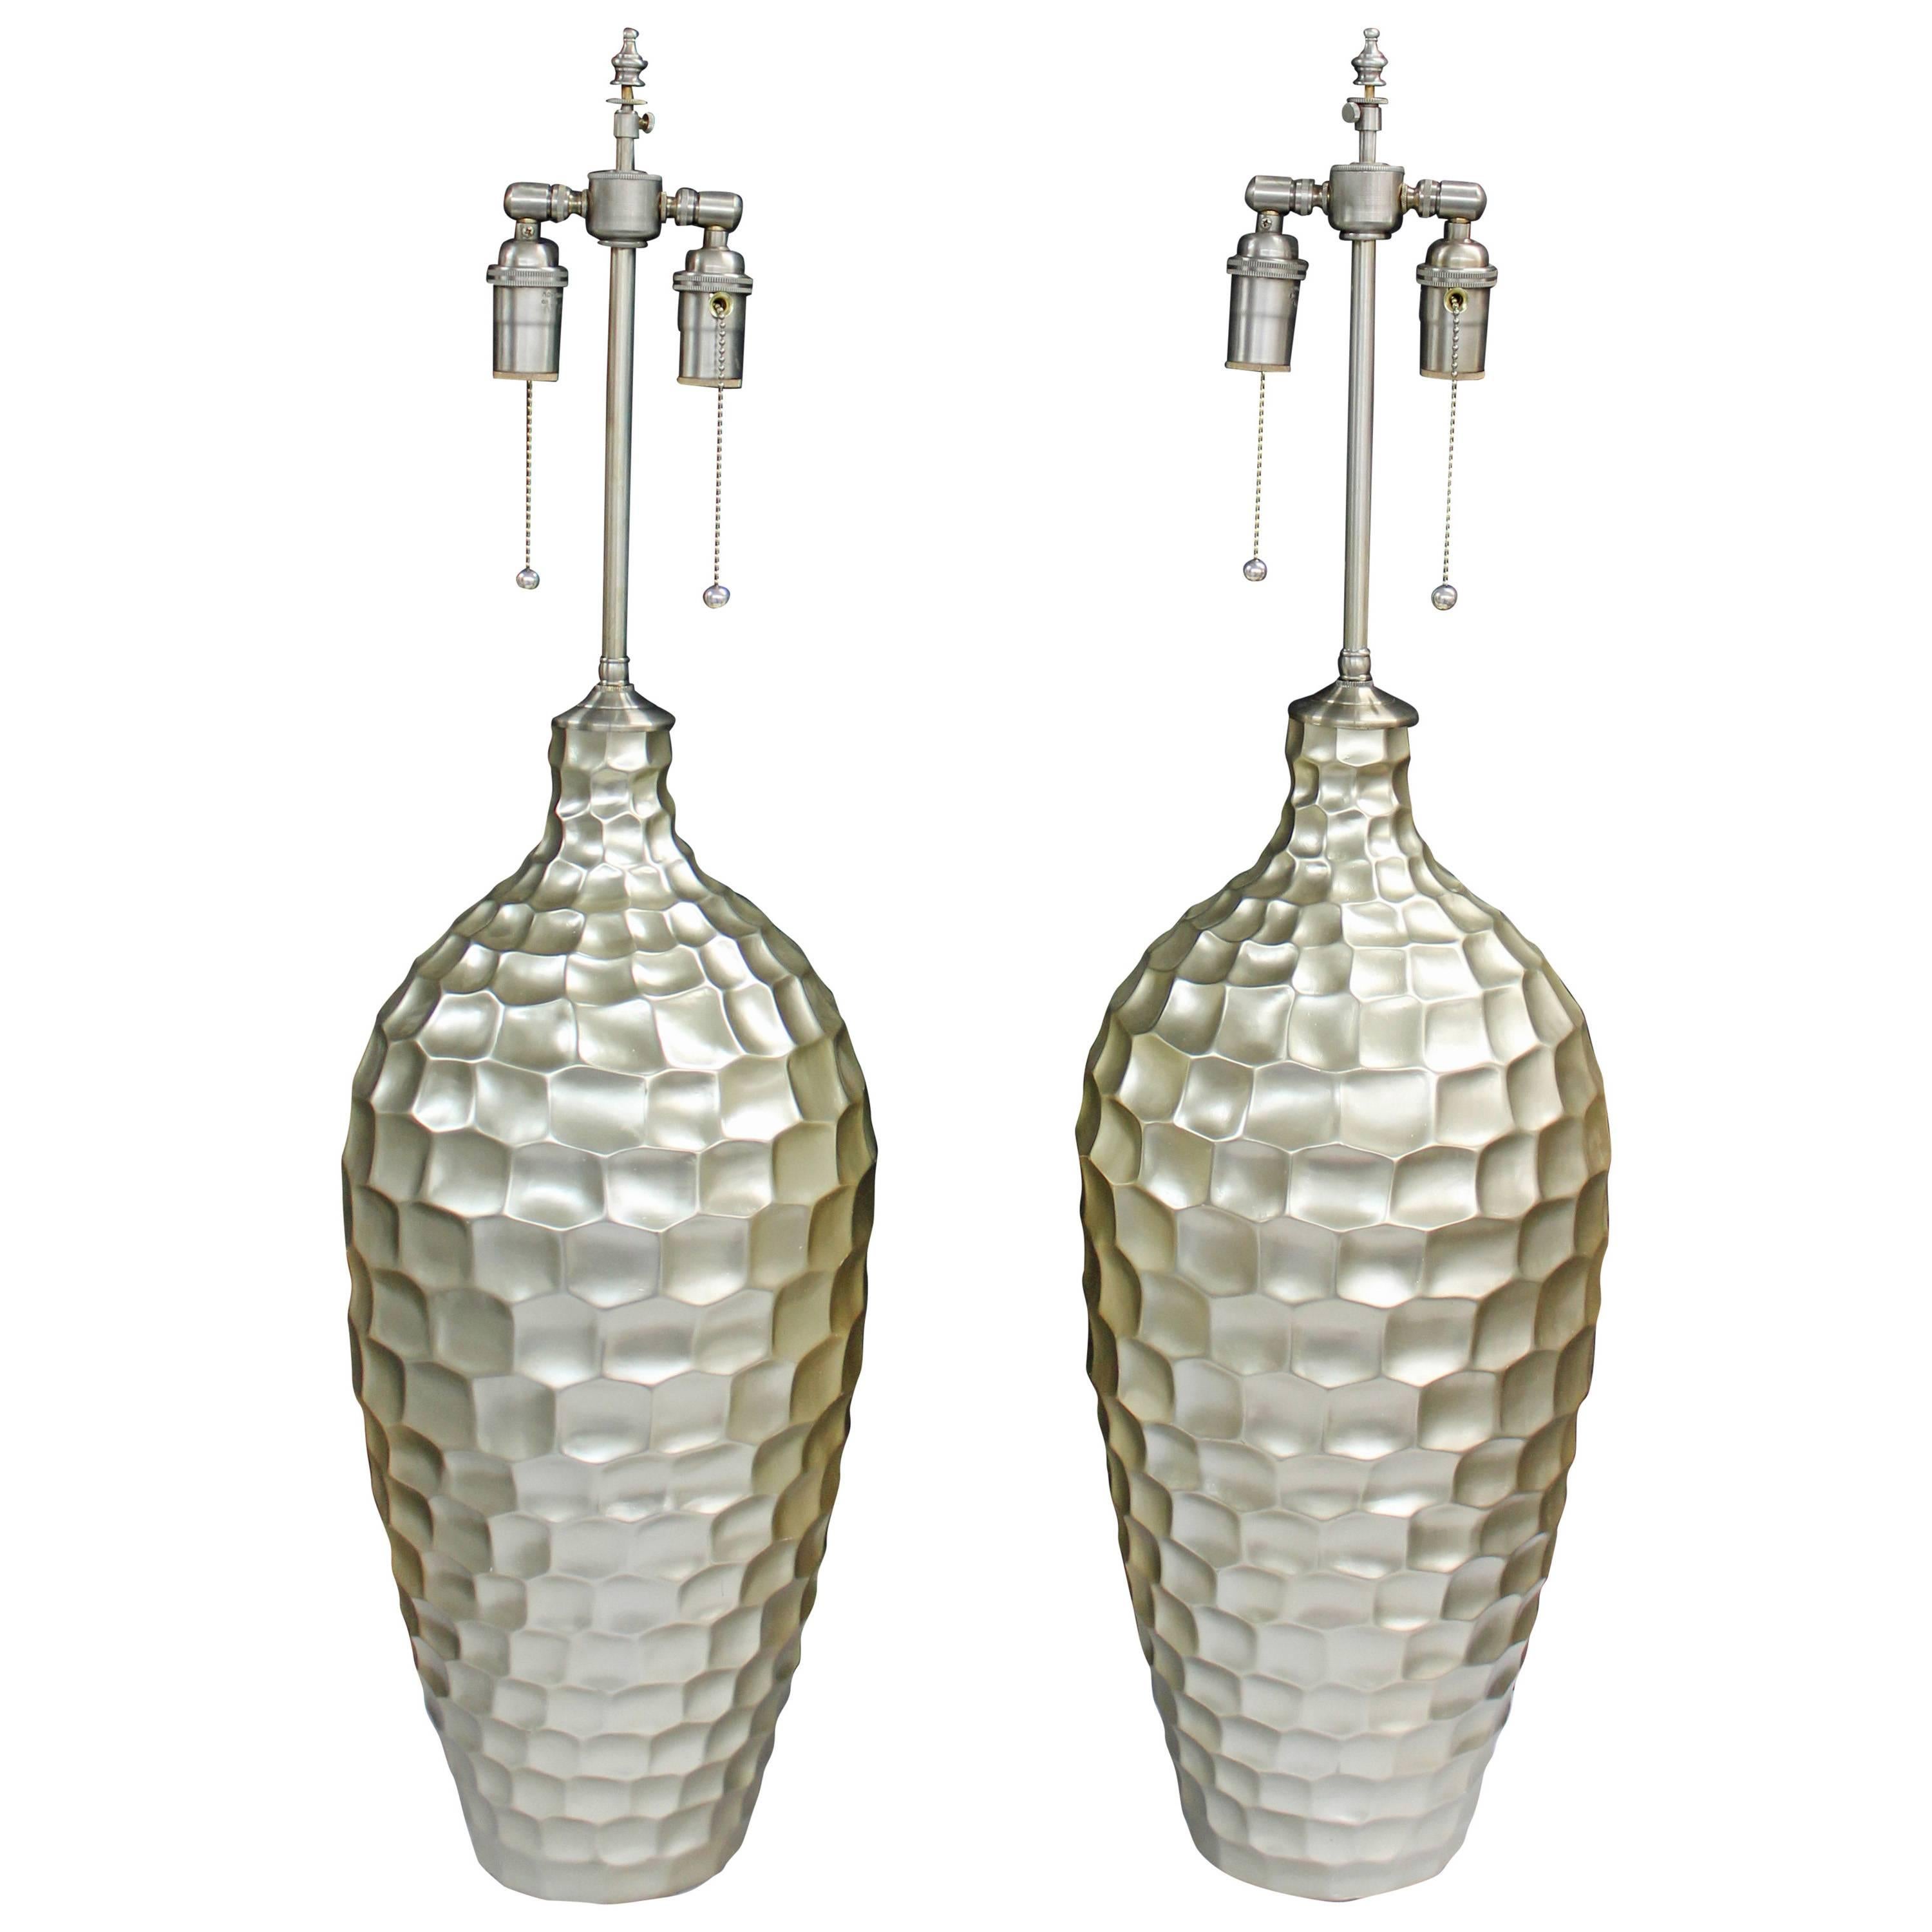 Pair of Large Textured Ceramic Vessels with Lamp Application